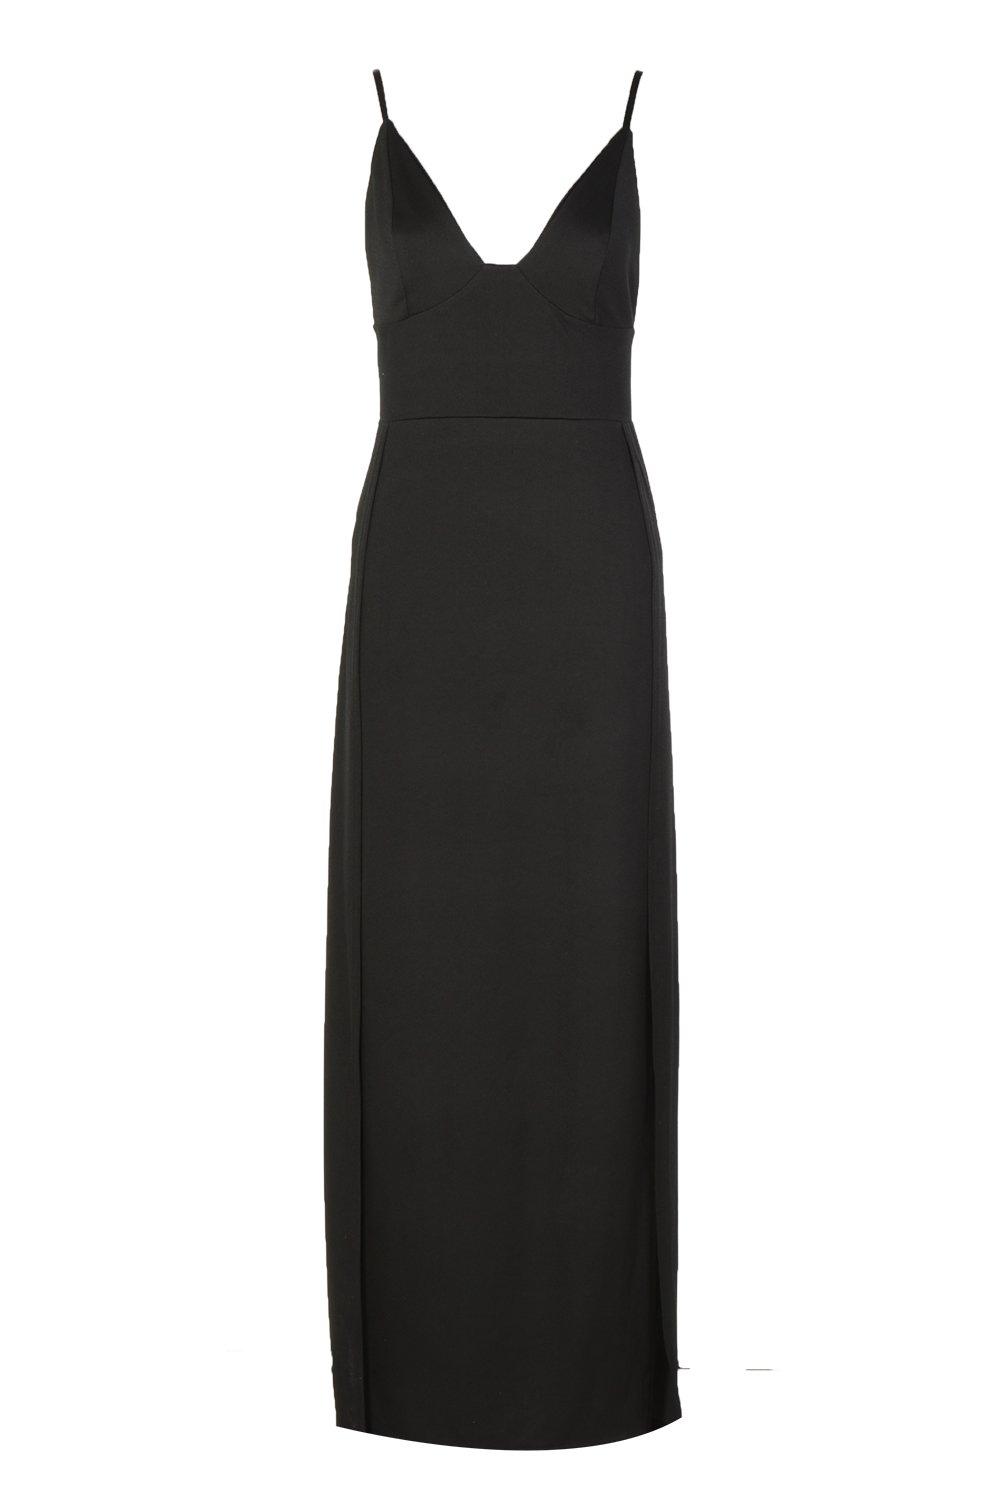 Body with deep plunge neck Color black - RESERVED - 1678I-99X